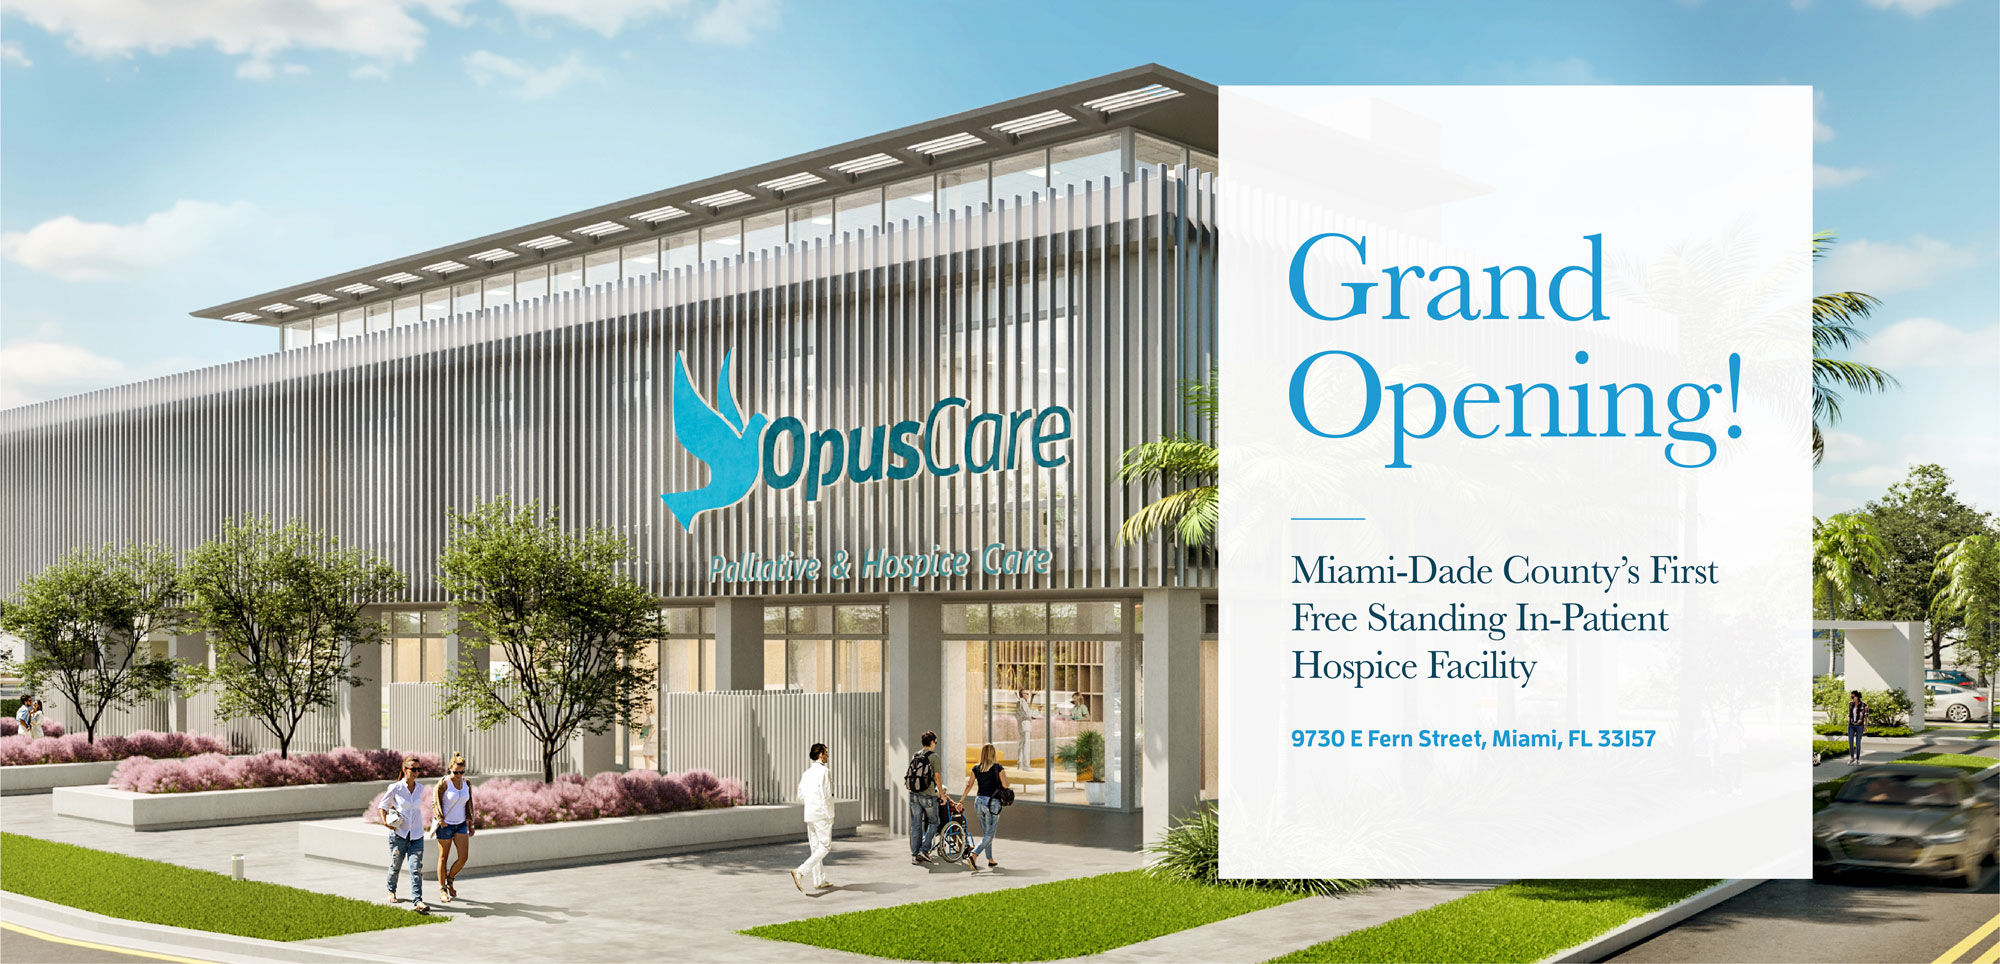 Grand Opening, Miami-Dade County's First
Free Standing In-Patientospice Facility, 9730 E Fern Street, Miami, FL 33157